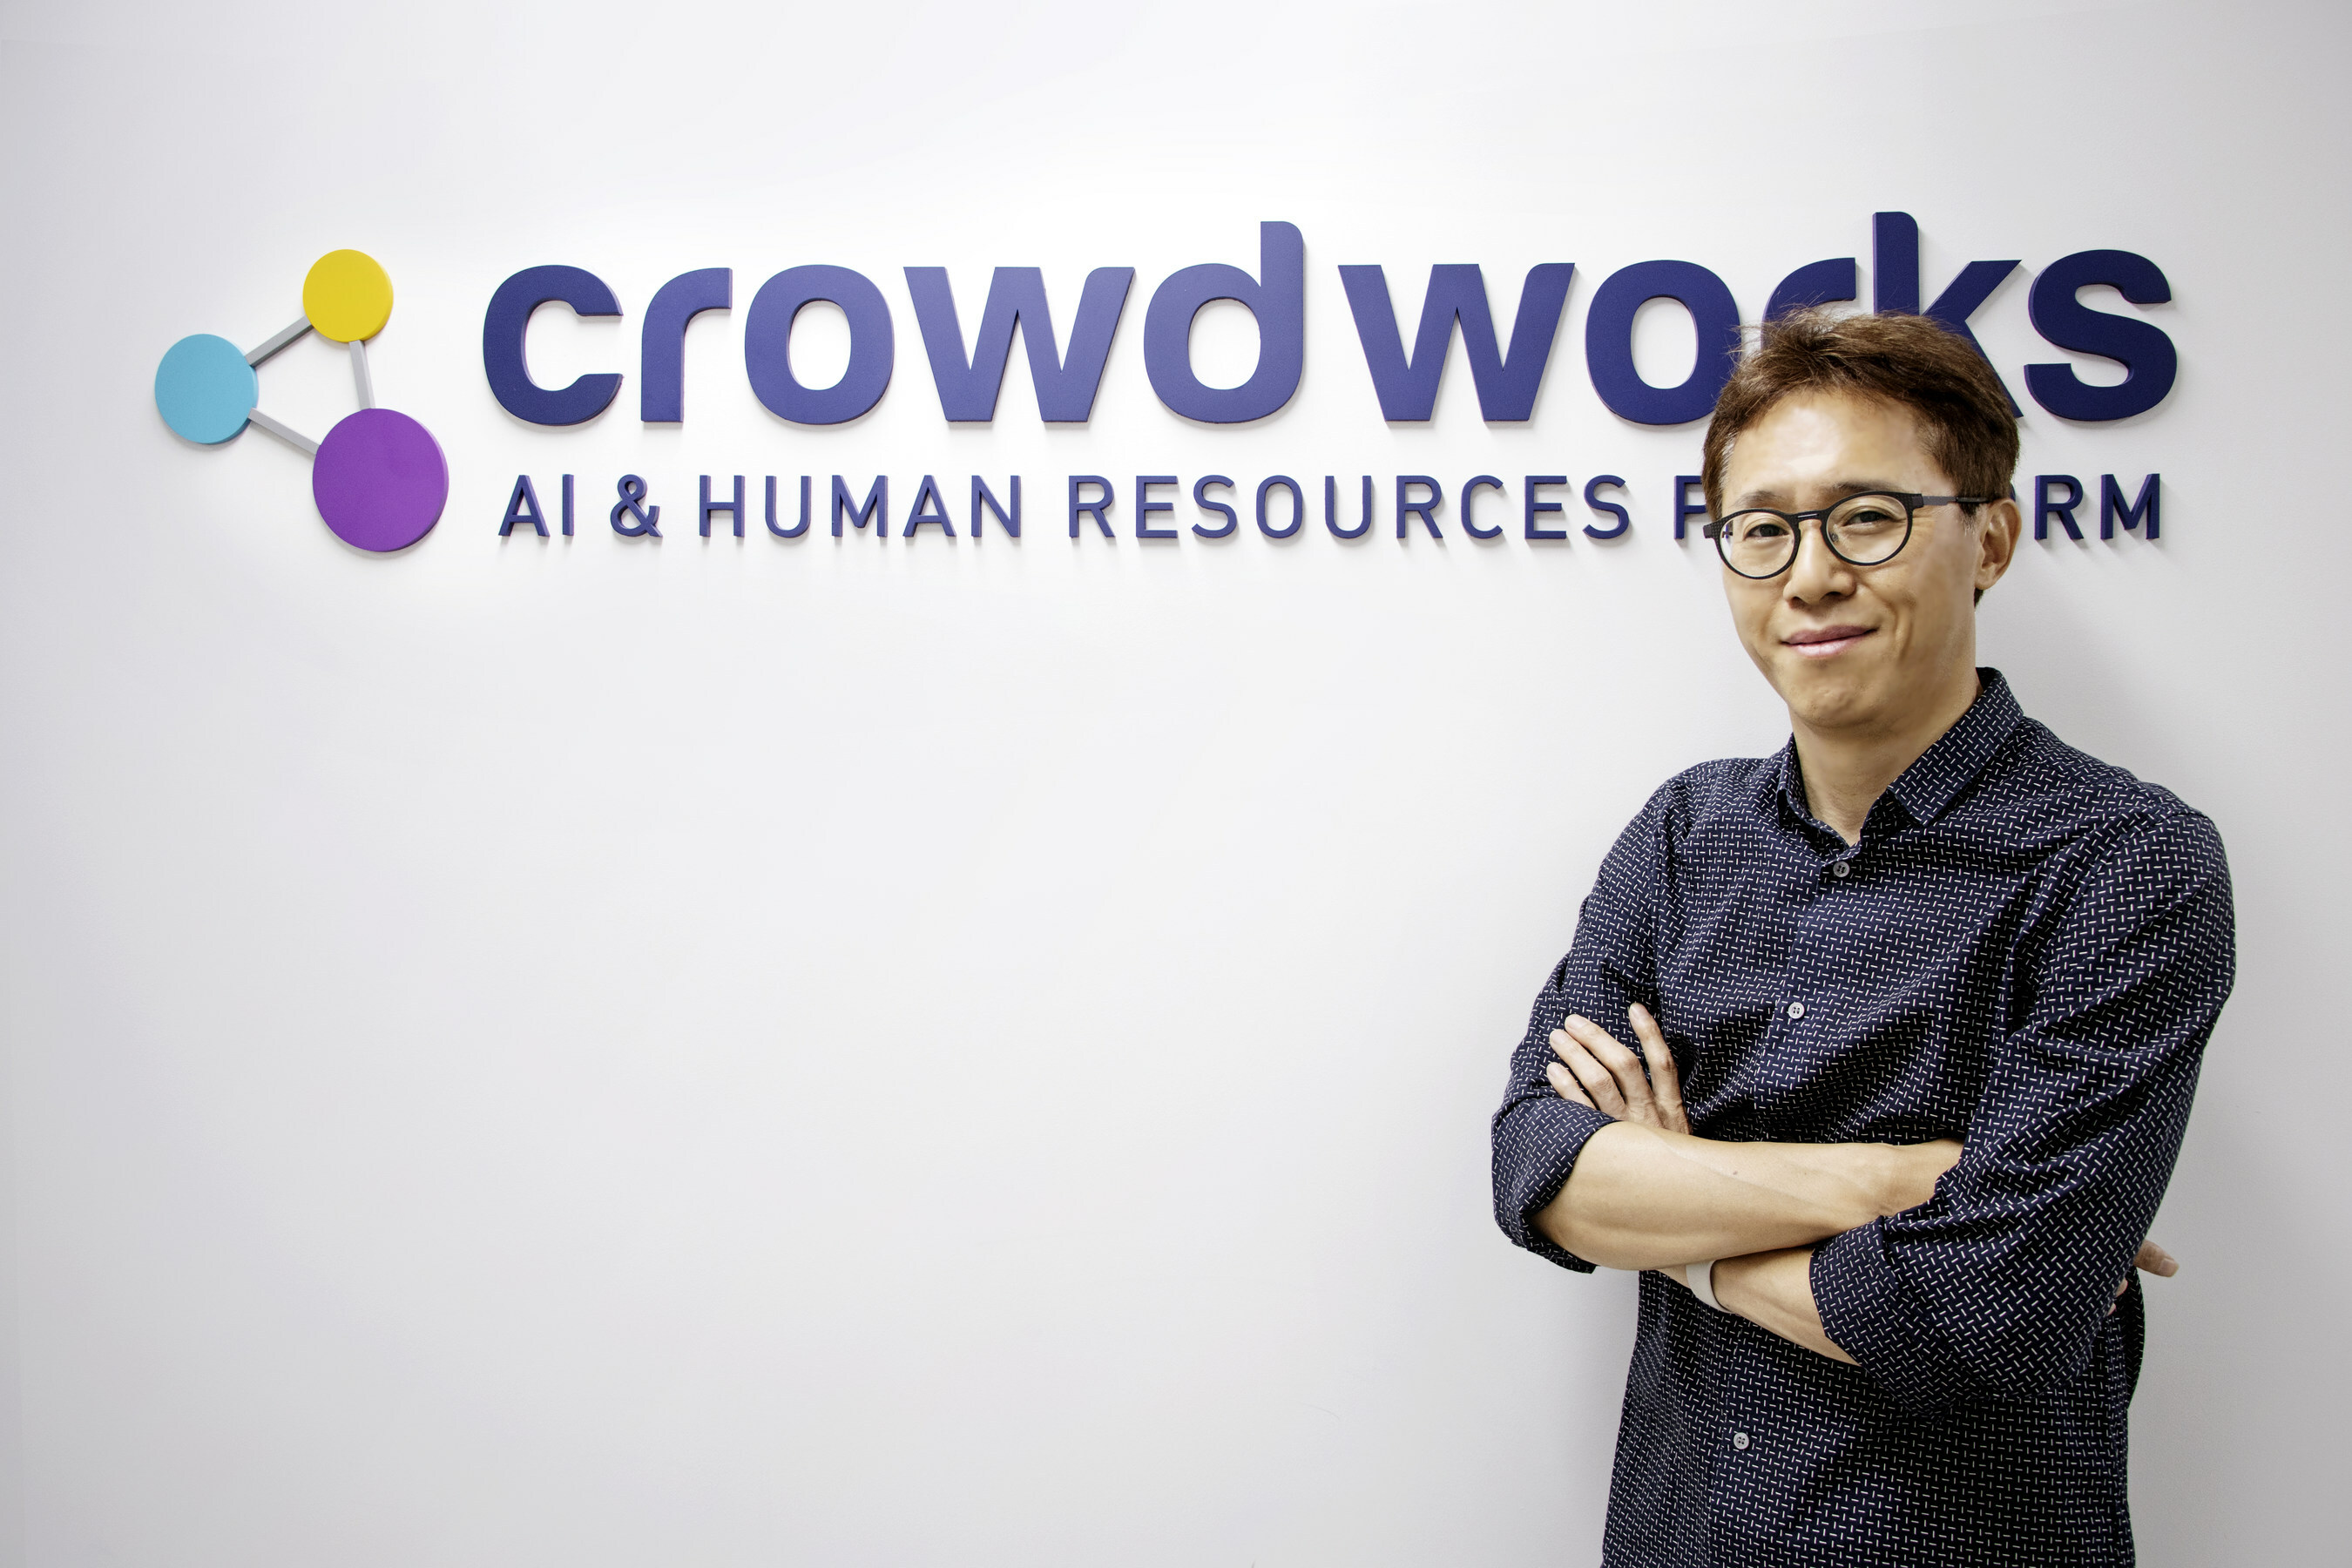 Naver-backed AI startup Crowdworks to go public